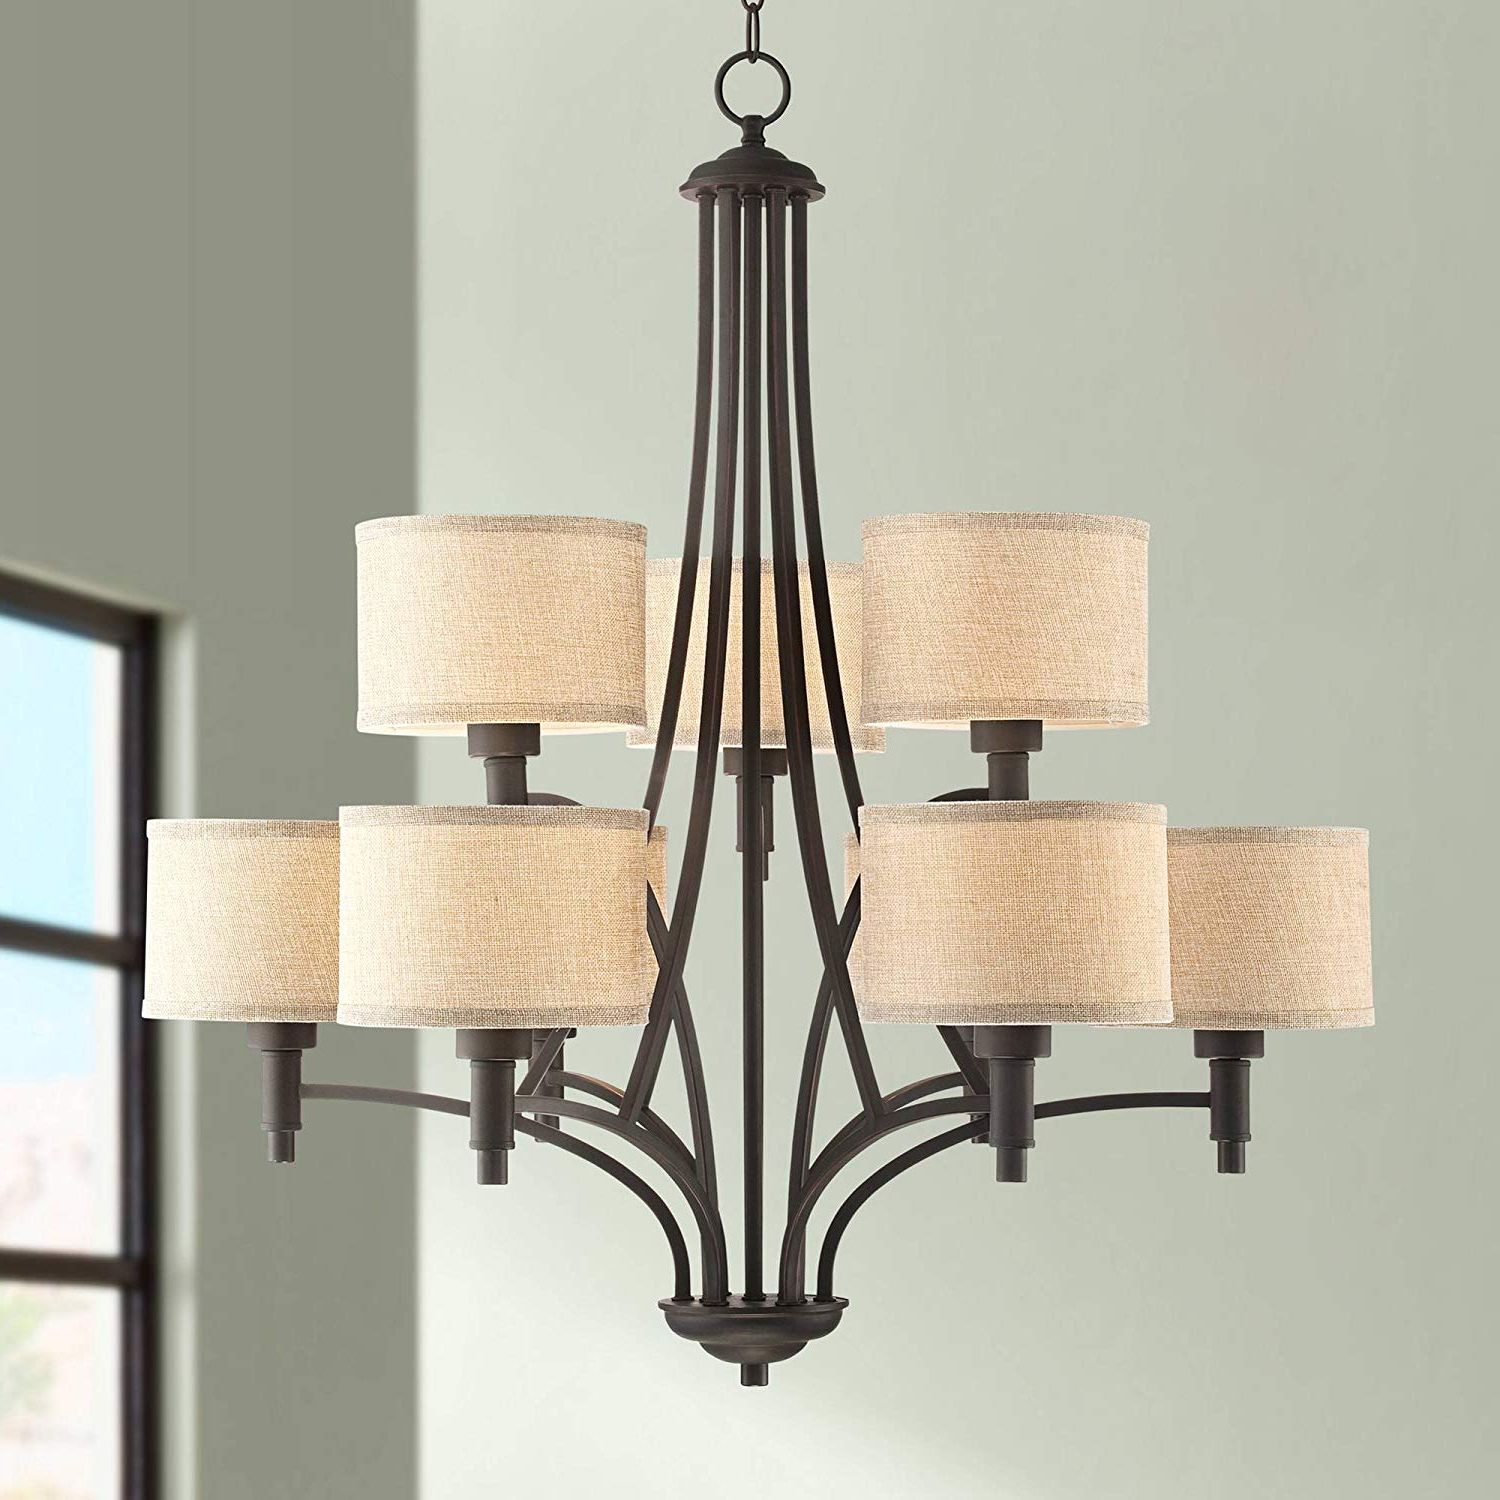 La Pointe 31" Wide Oil Rubbed Bronze 9 Light Chandelier – Franklin Iron  Works With Well Liked Mcknight 9 Light Chandeliers (View 11 of 25)